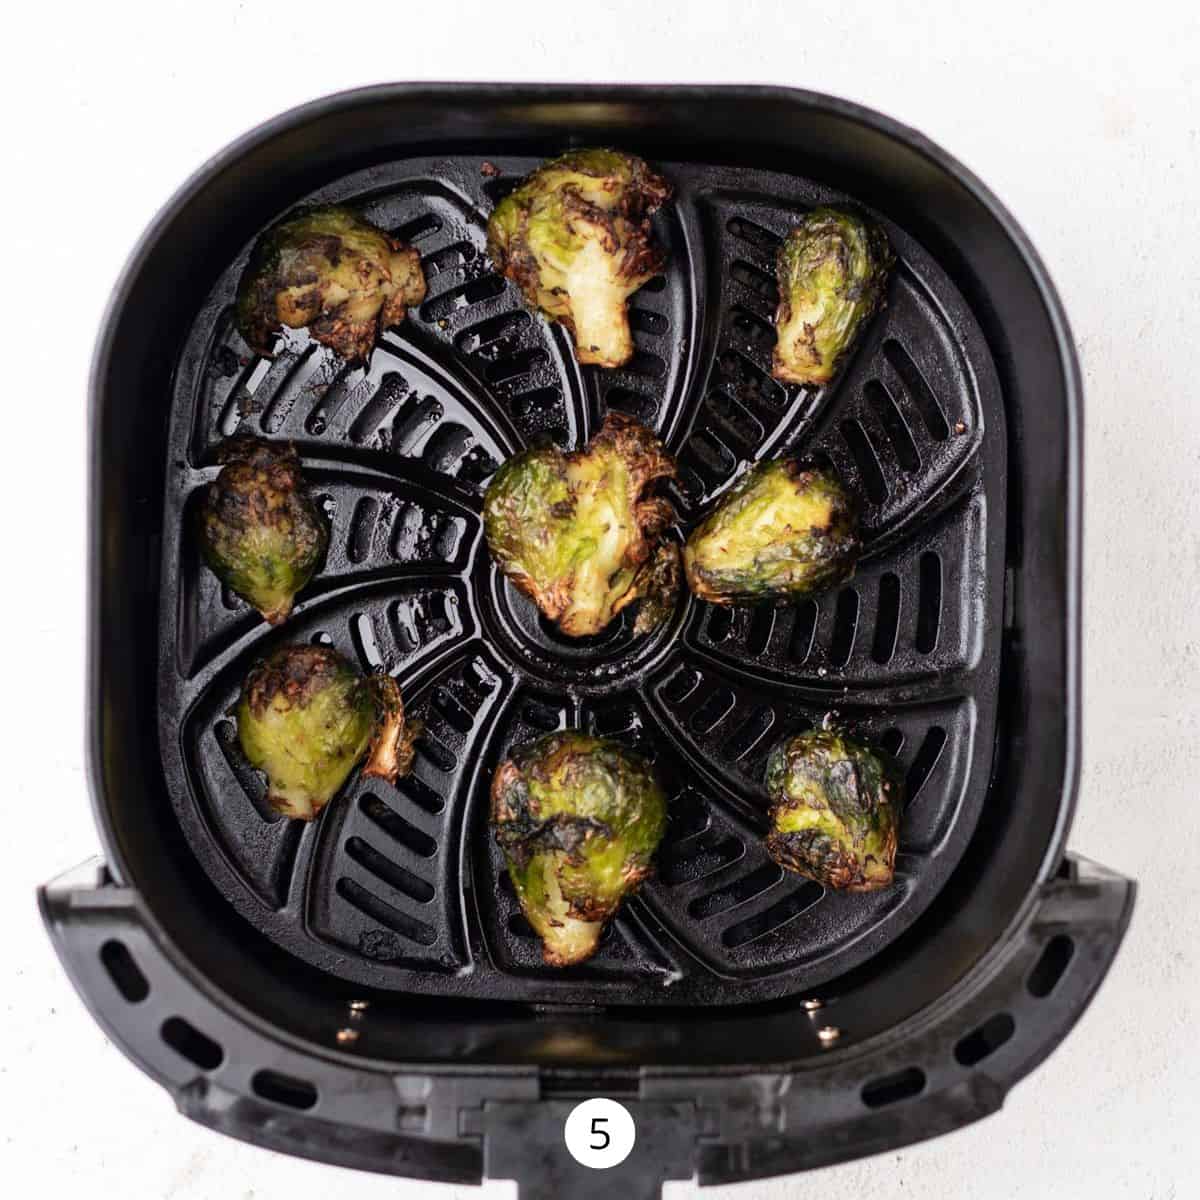 Cooked smashed Brussels Sprouts in an air fryer basket.